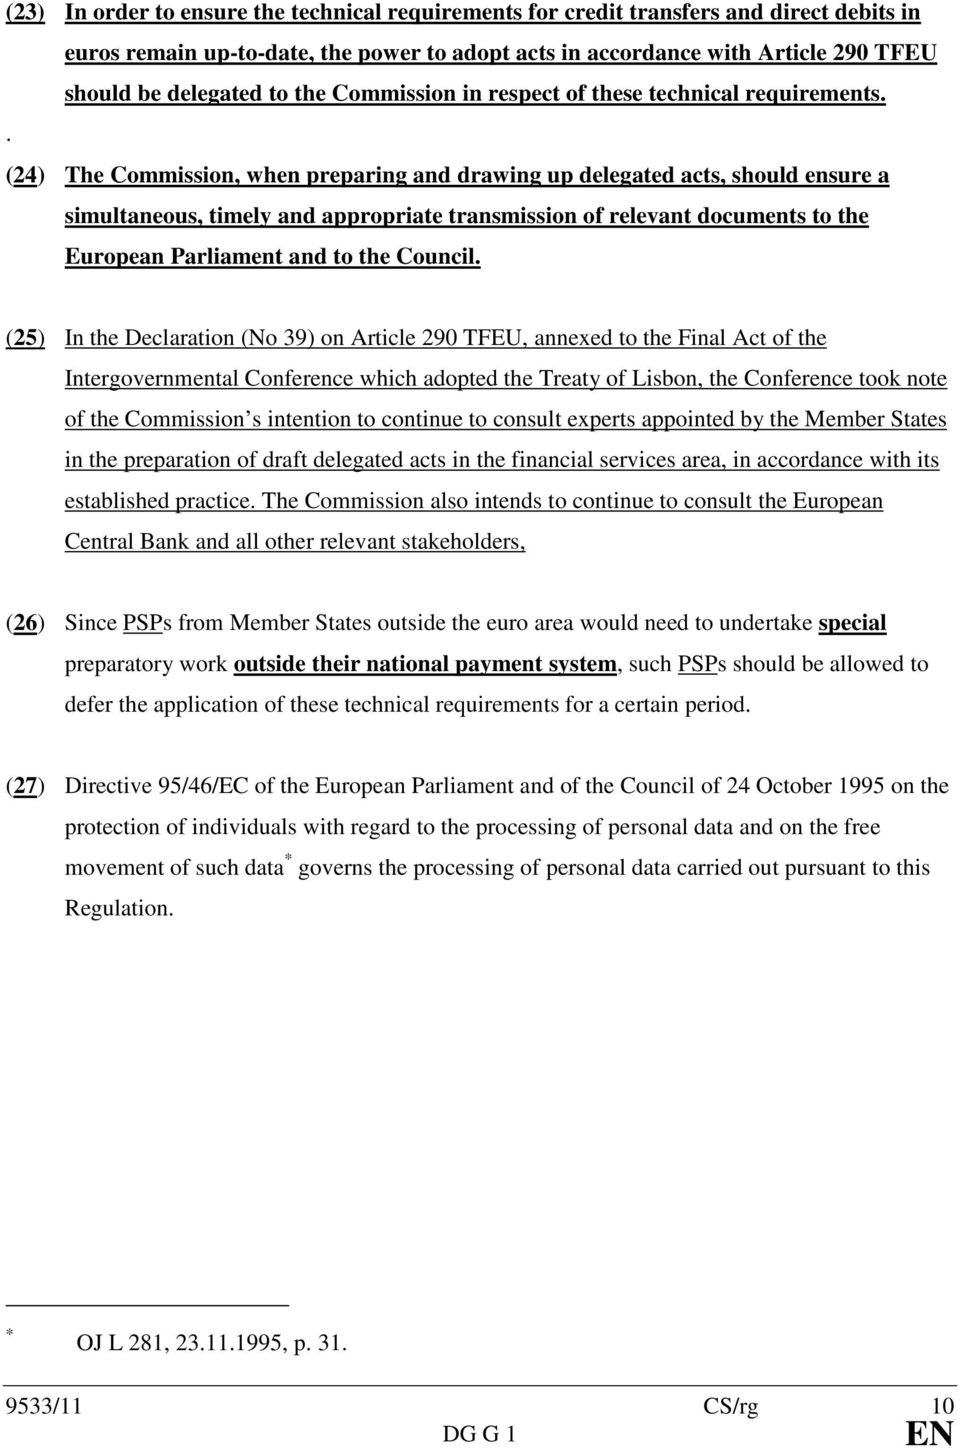 . (24) The Commission, when preparing and drawing up delegated acts, should ensure a simultaneous, timely and appropriate transmission of relevant documents to the European Parliament and to the